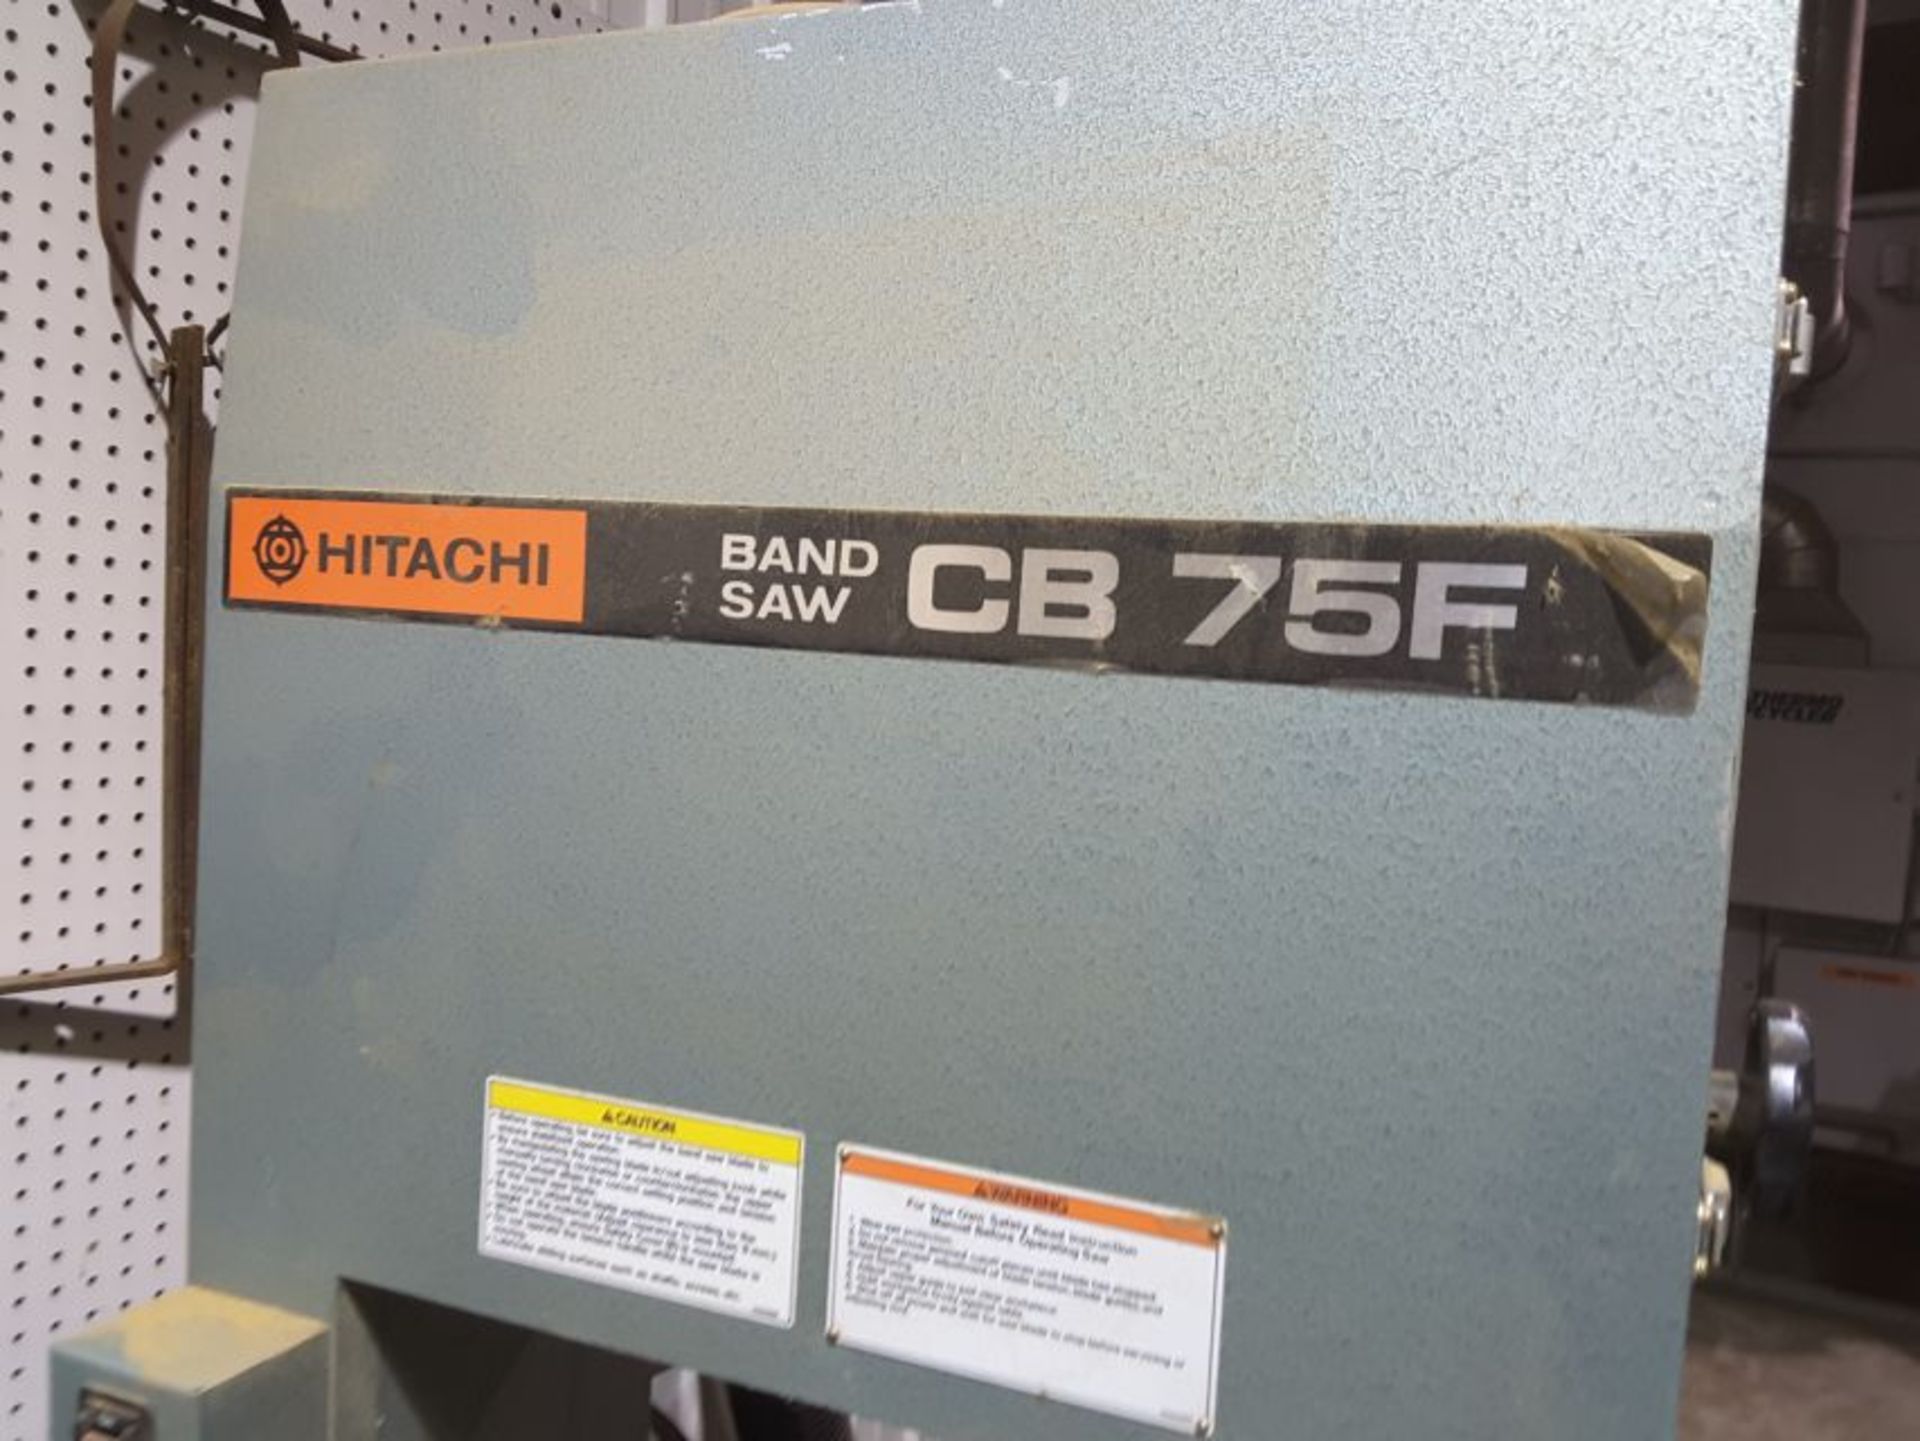 Hitachi model 3B75F bandsaw with 3" wide blade - Image 2 of 6